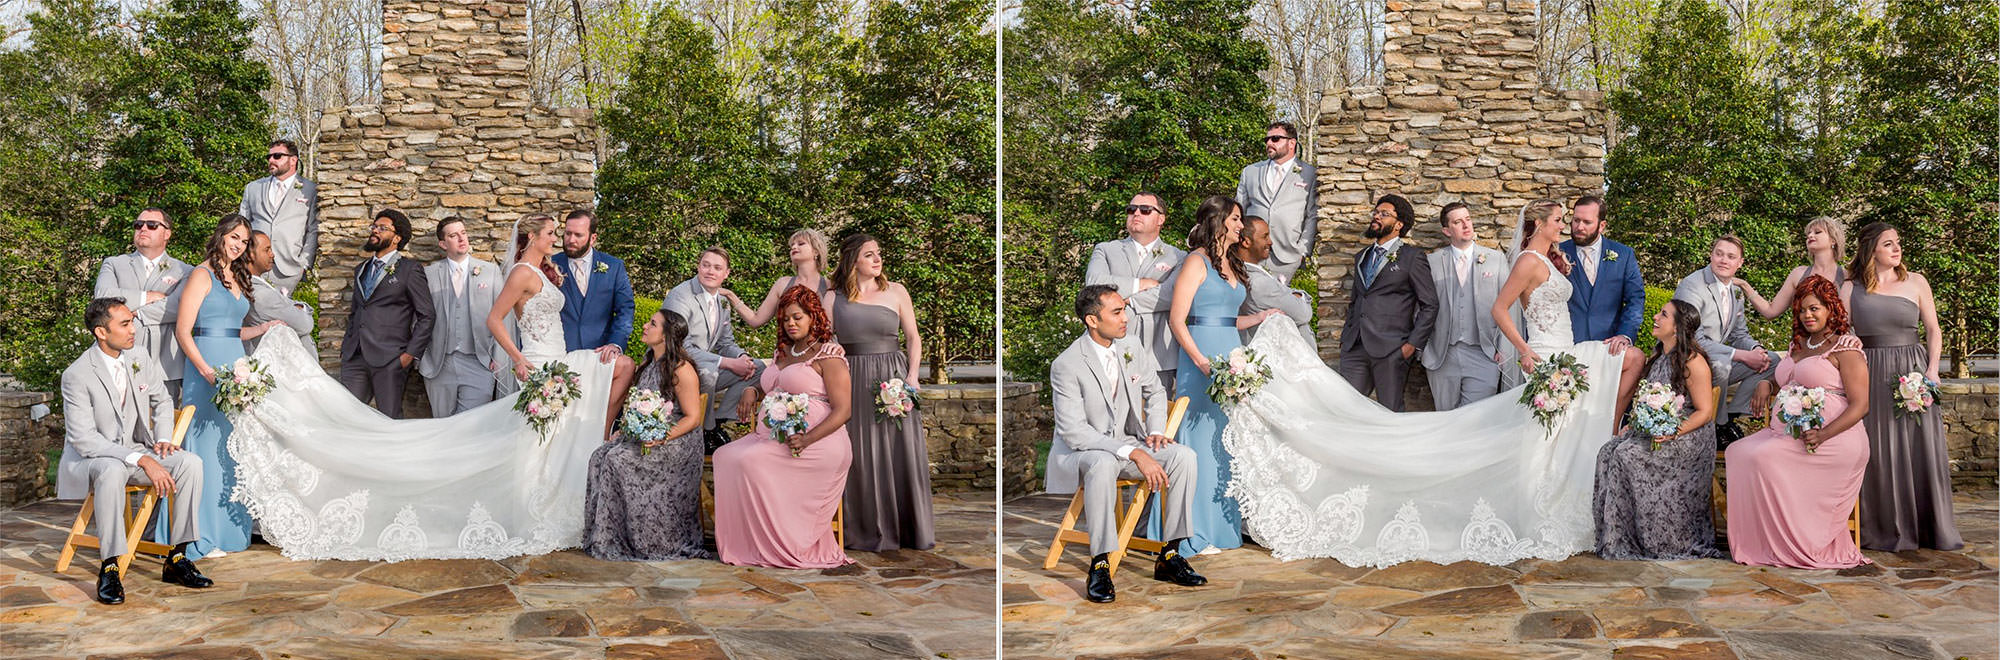 Difference In Wedding Photography Editing